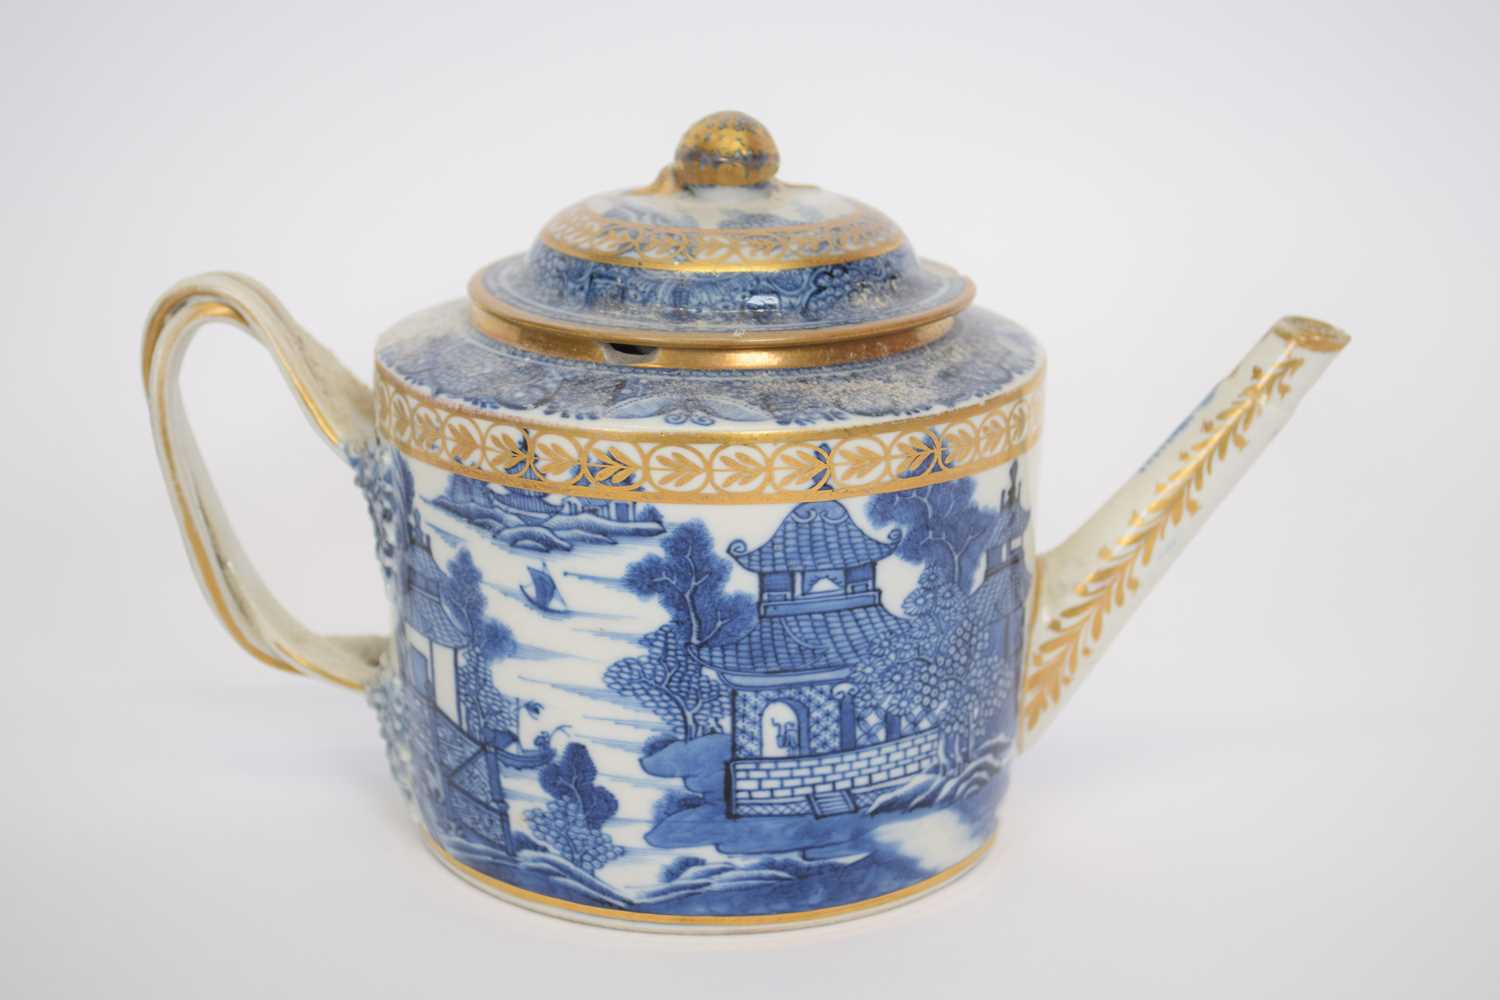 Late 18th century Chinese porcelain teapot with blue and white design and gilt overglaze - Image 4 of 8